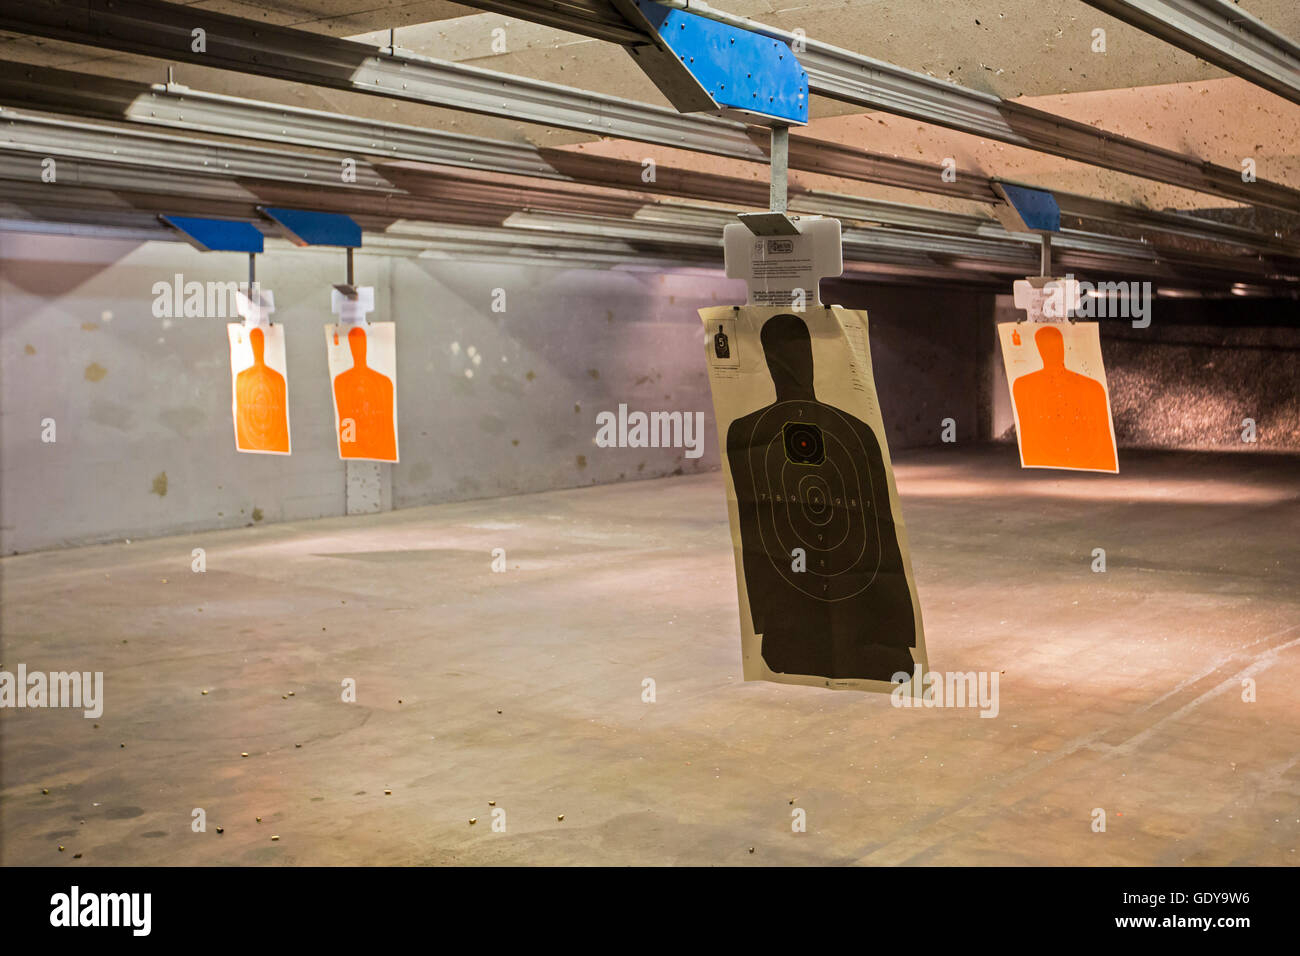 Las Vegas, Nevada - Targets at the Discount Firearms + Ammo indoor shooting range. Stock Photo